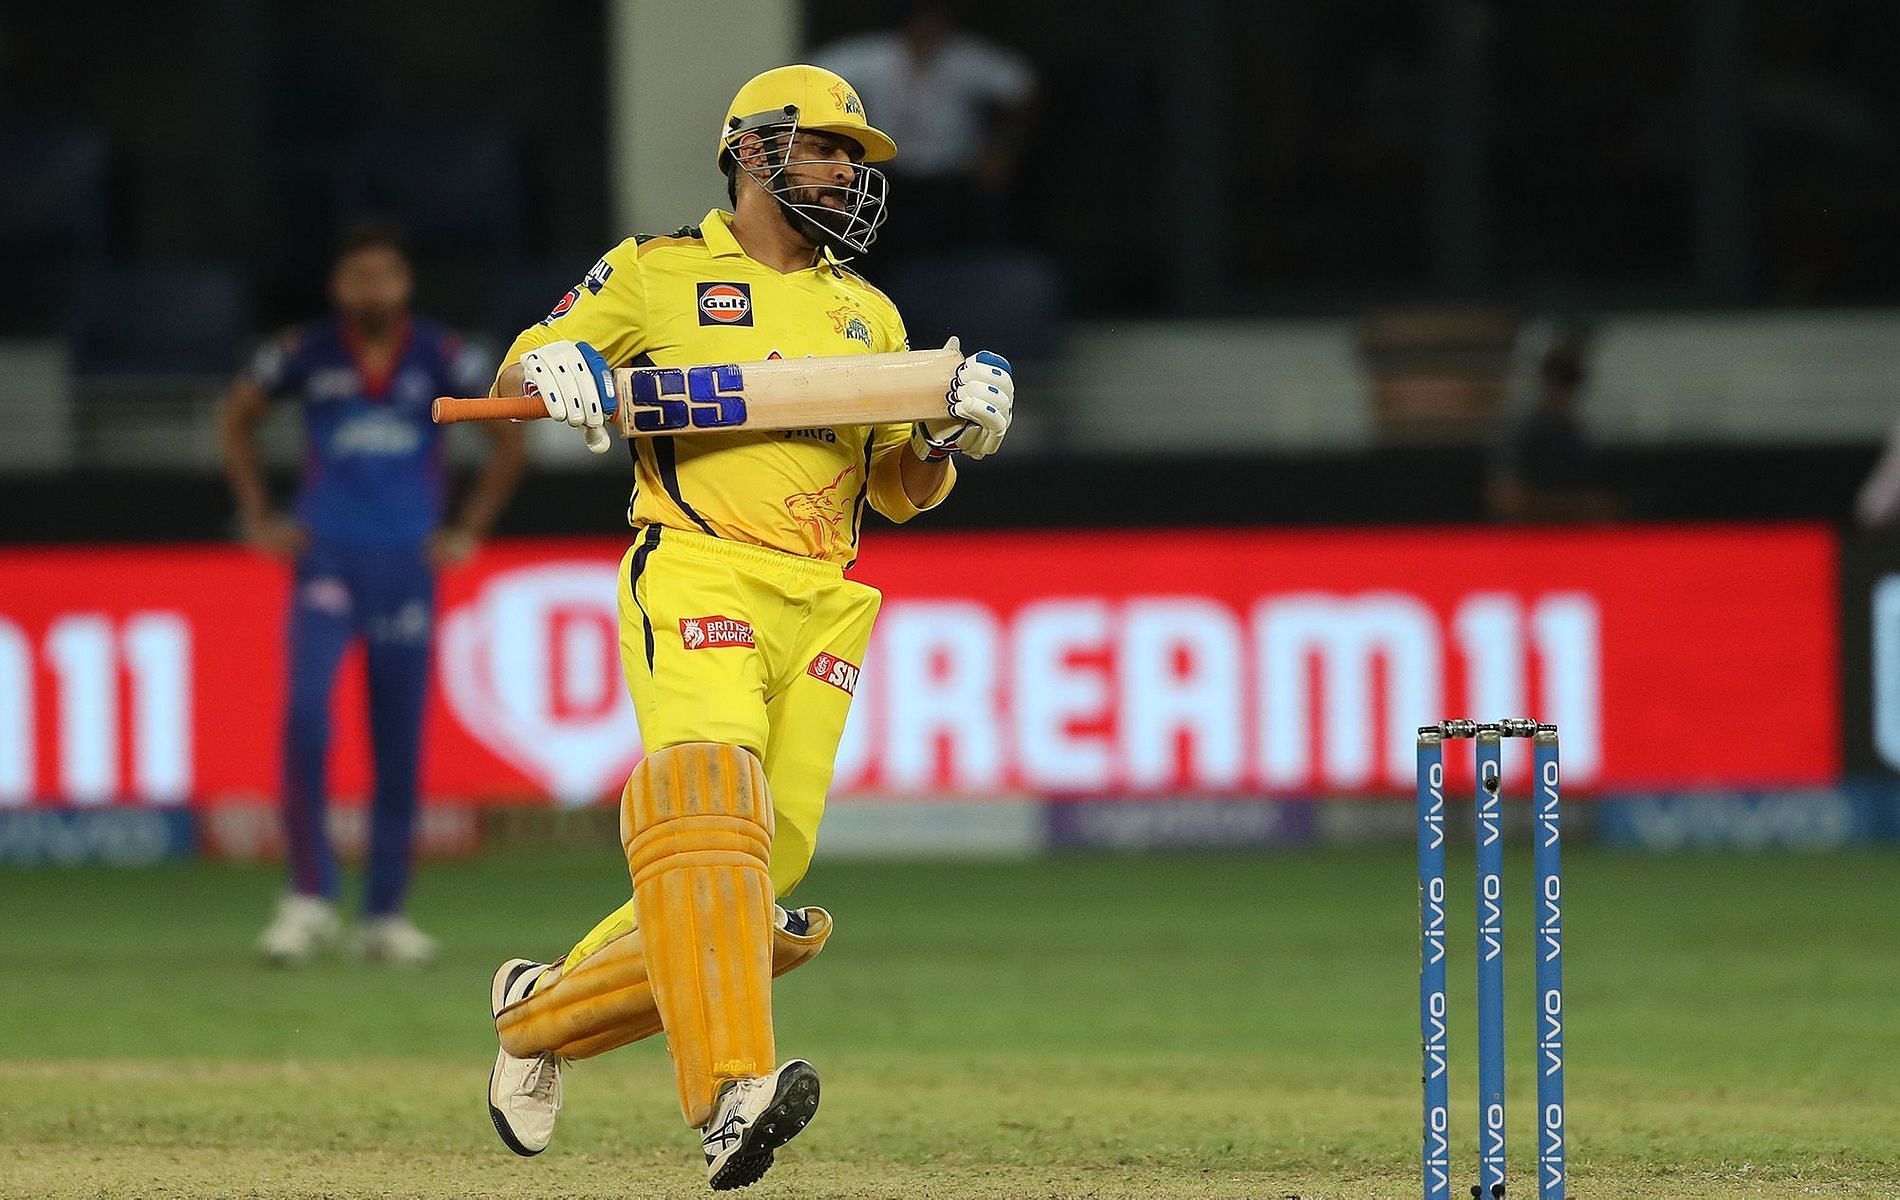 MS Dhoni has seen his form take a major dip in the last two IPL seasons.